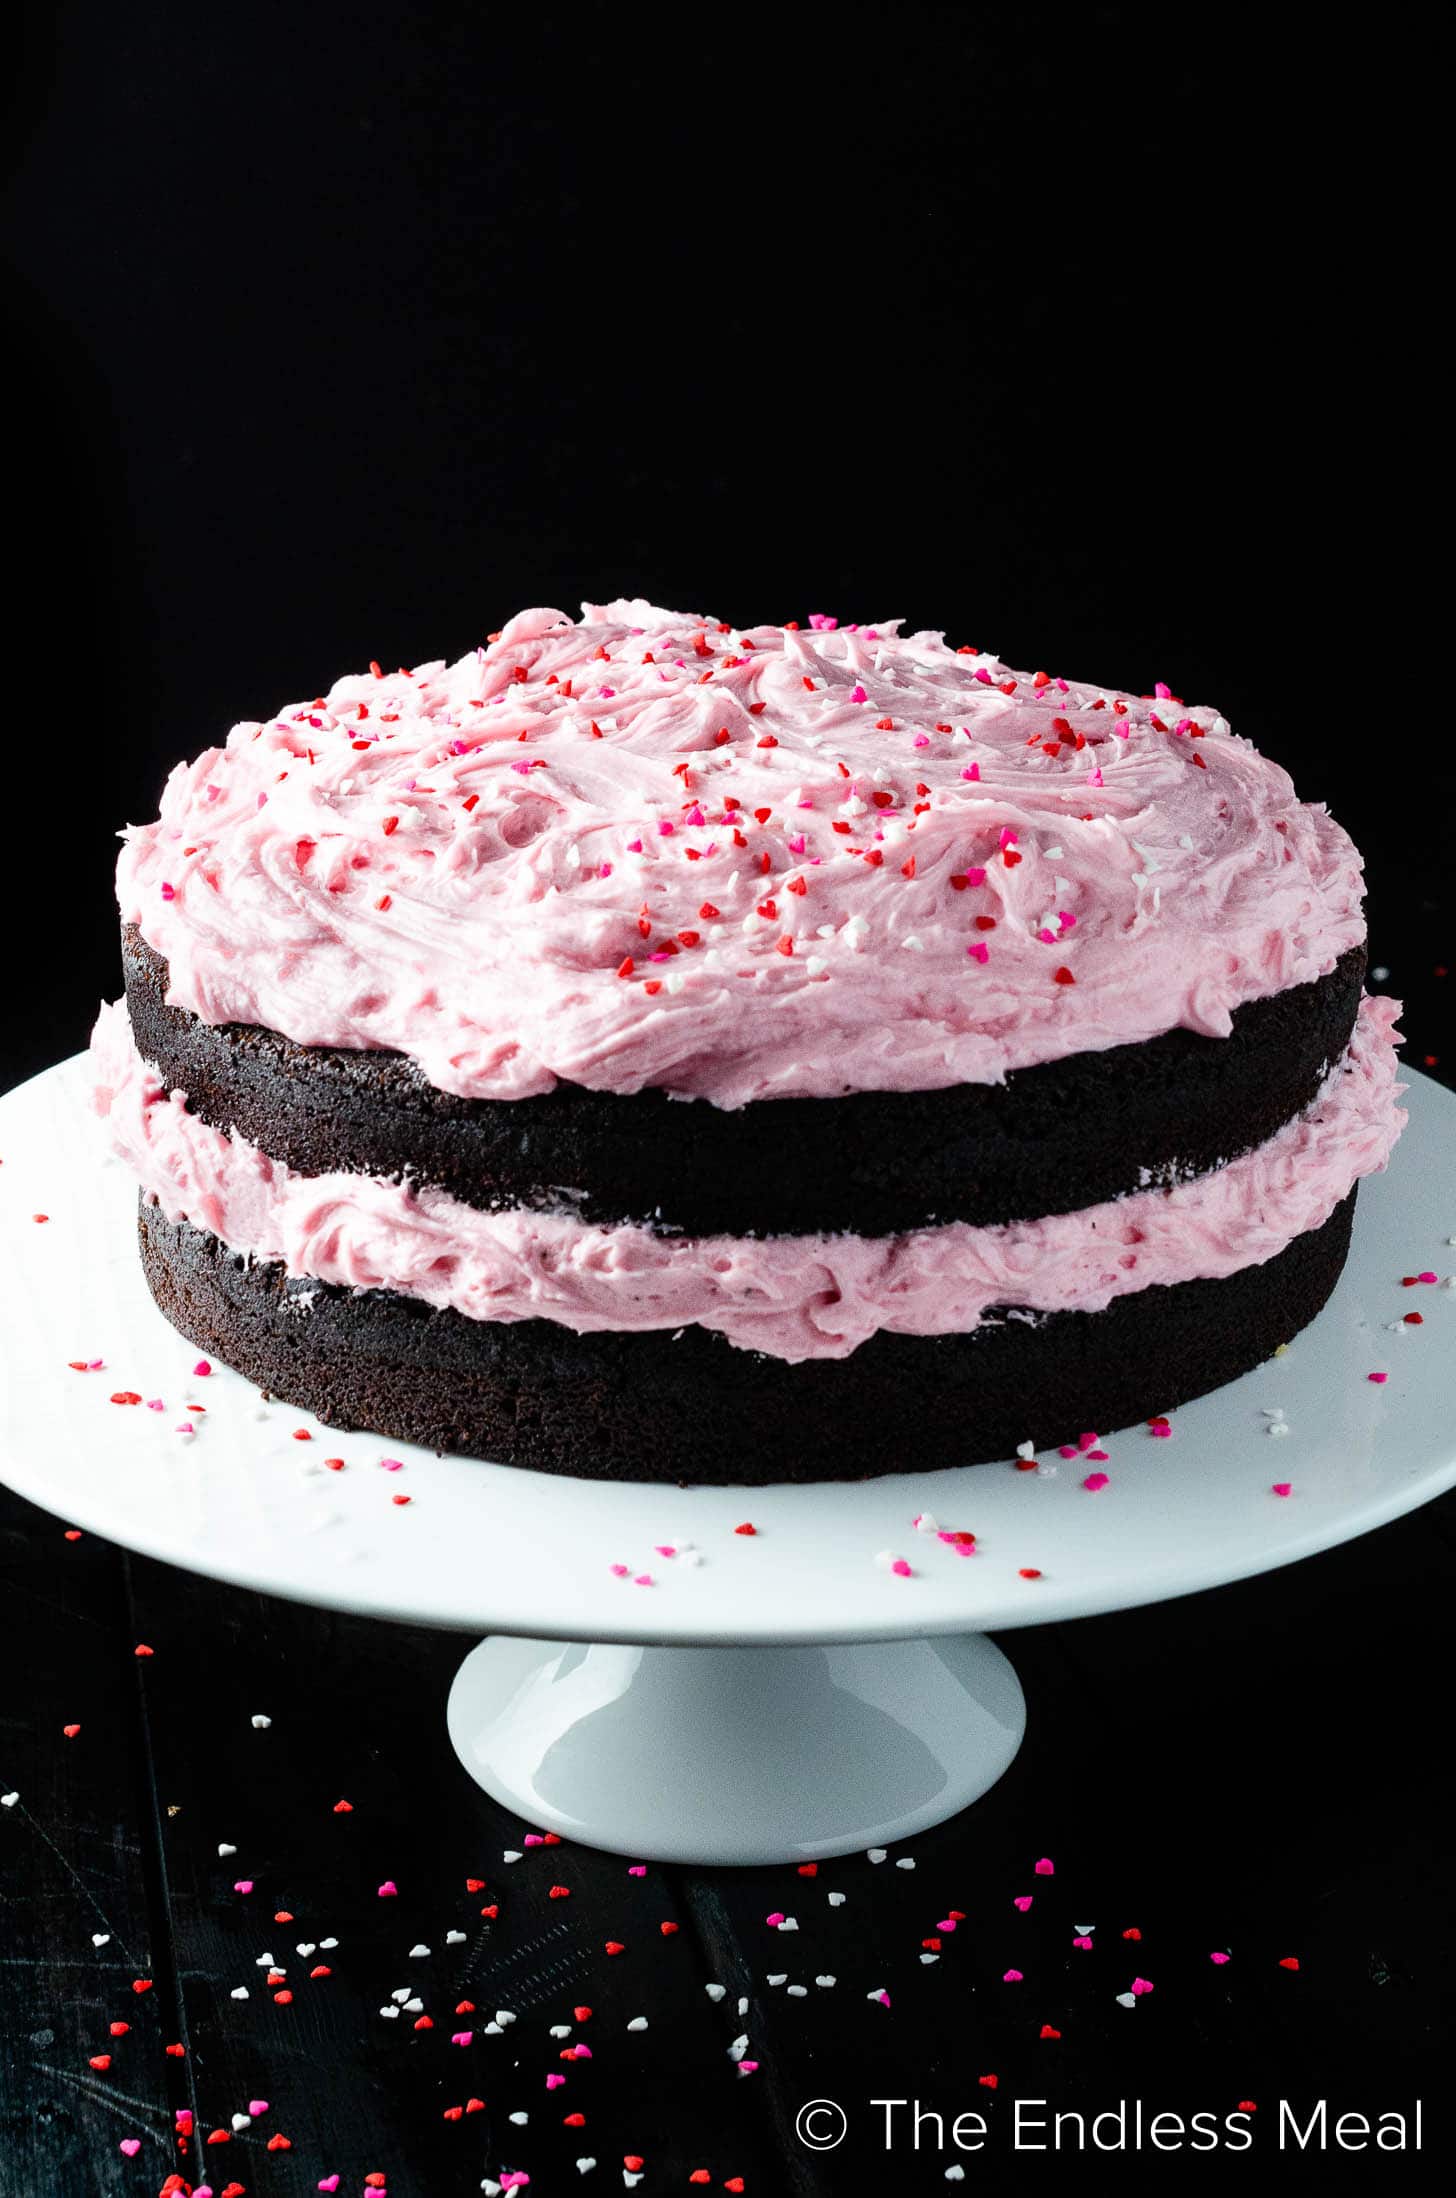 A Chocolate Beet Cake on a cake stand with pink frosting